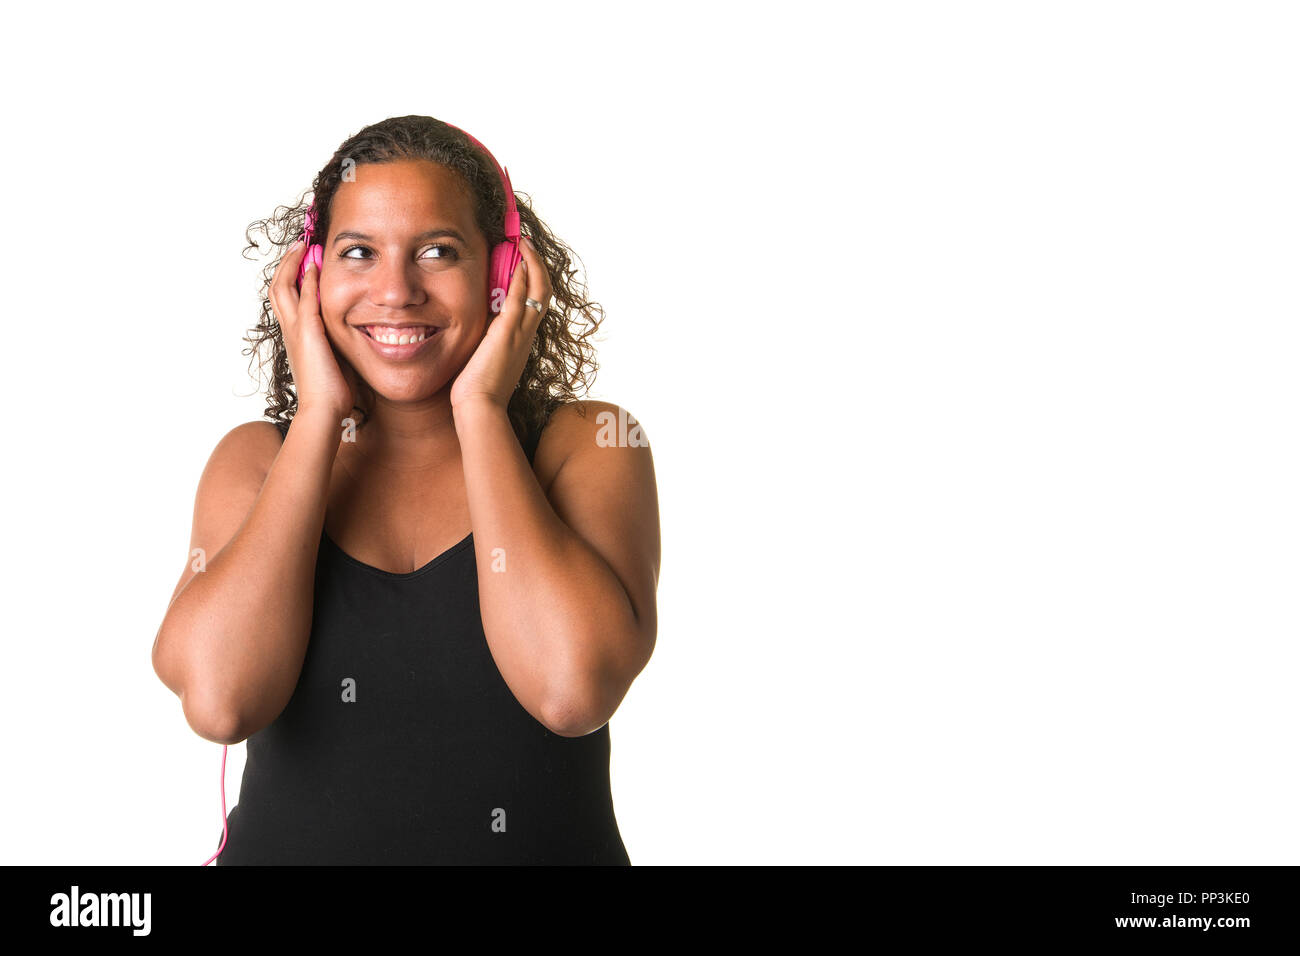 Young pretty black woman listening to music on a pink headphone isolated on a white background Stock Photo